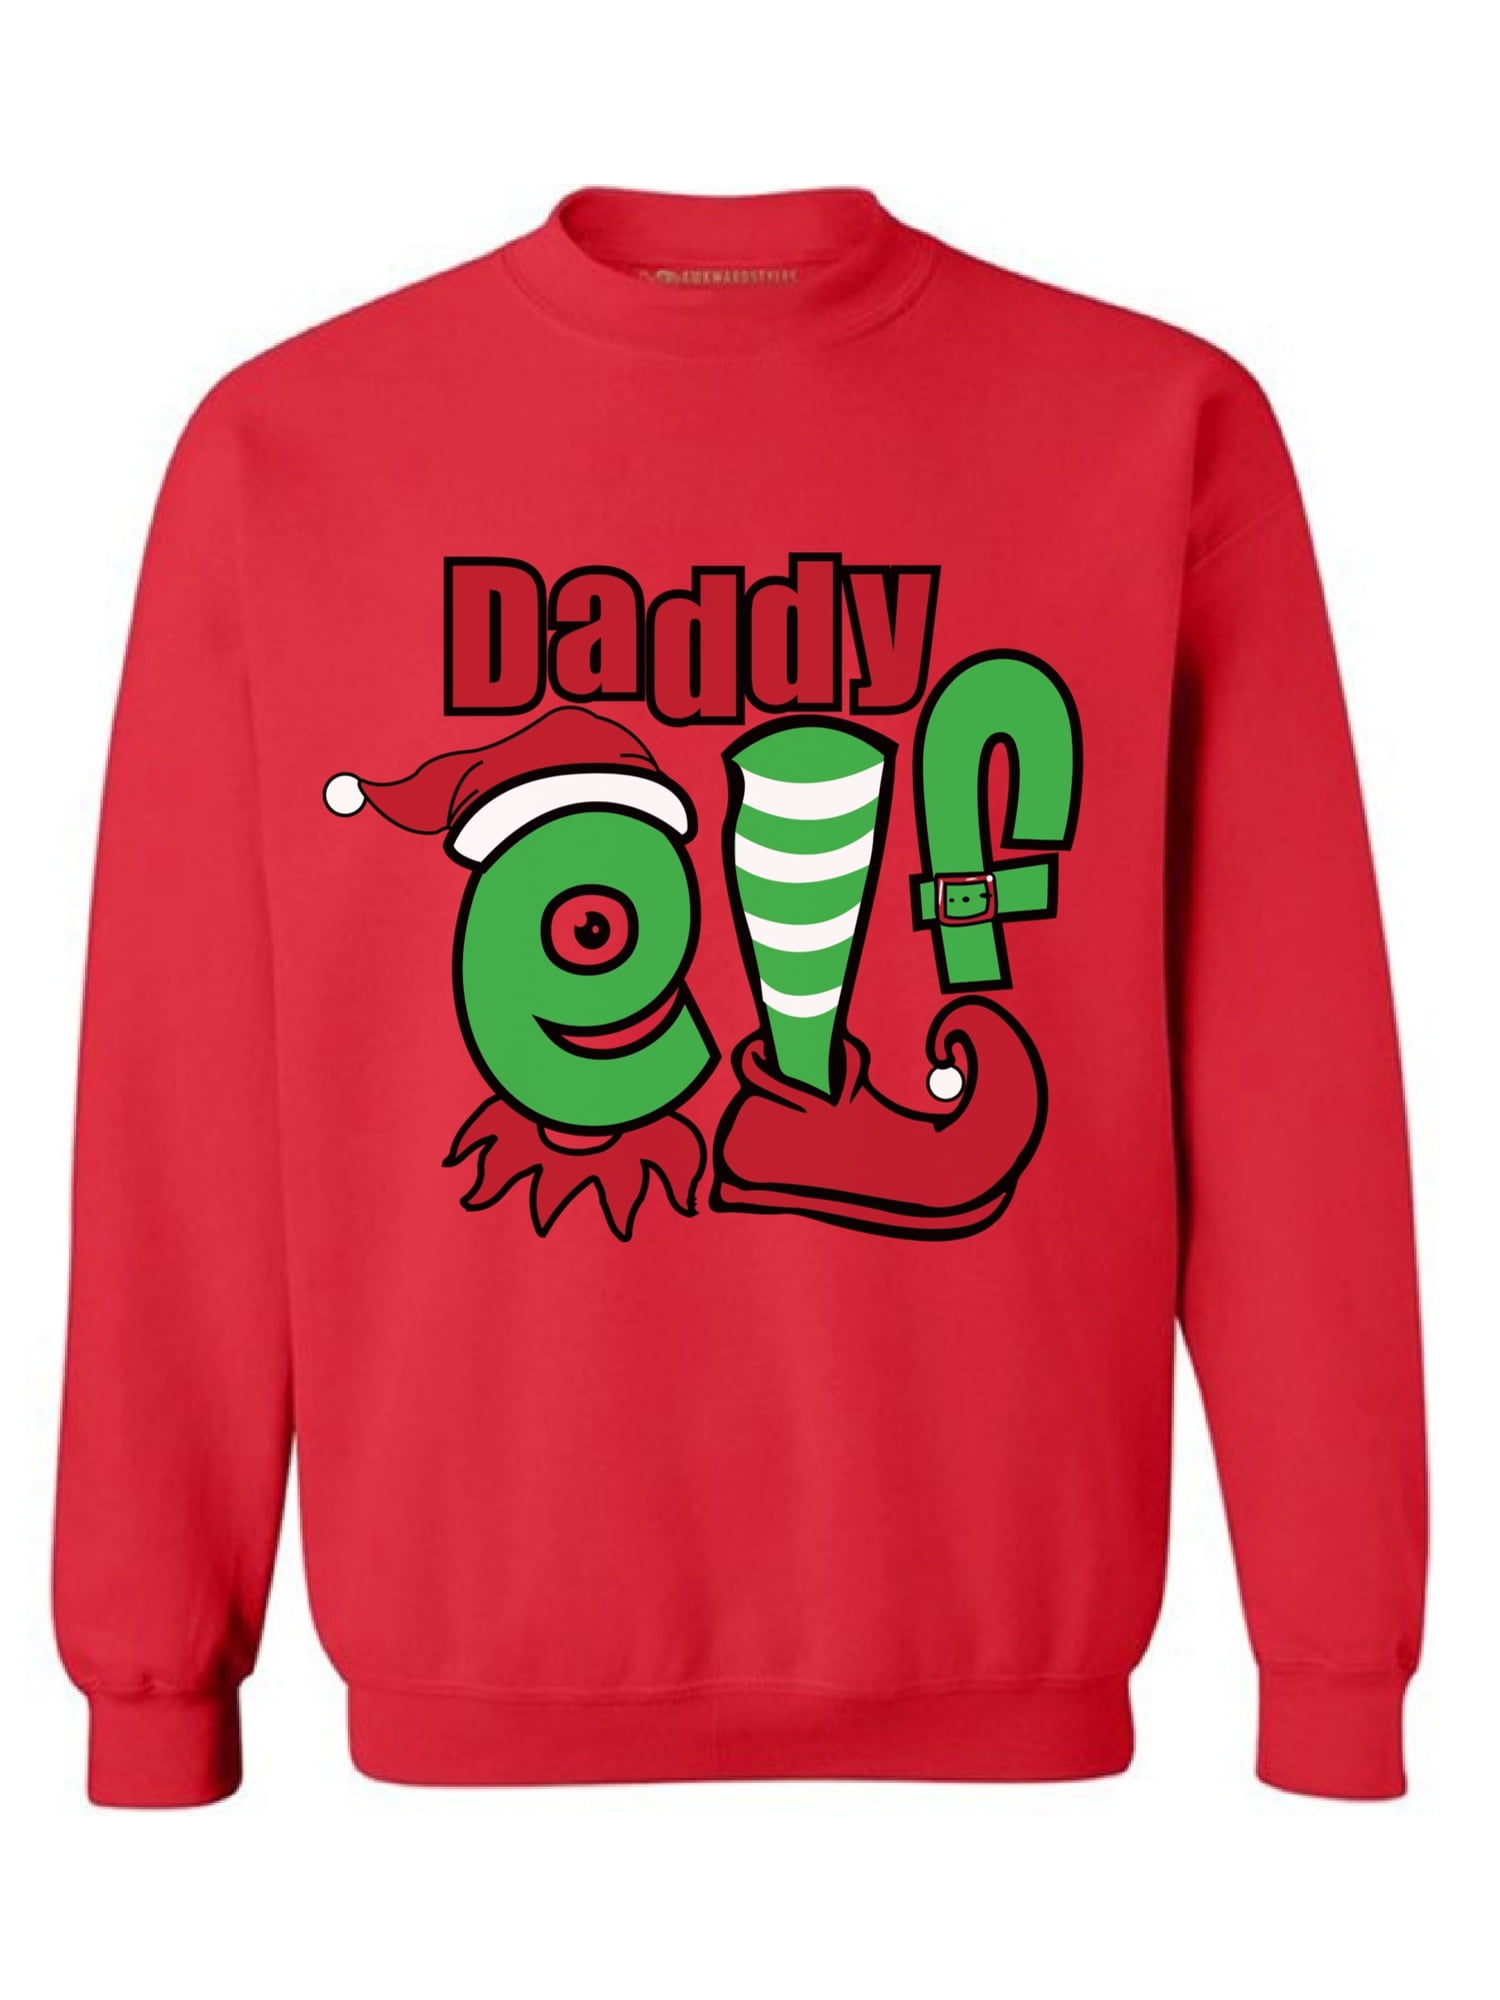 Daddy Elf Christmas Jumper Sweater Jumper Pull Over Present Dad Father Family